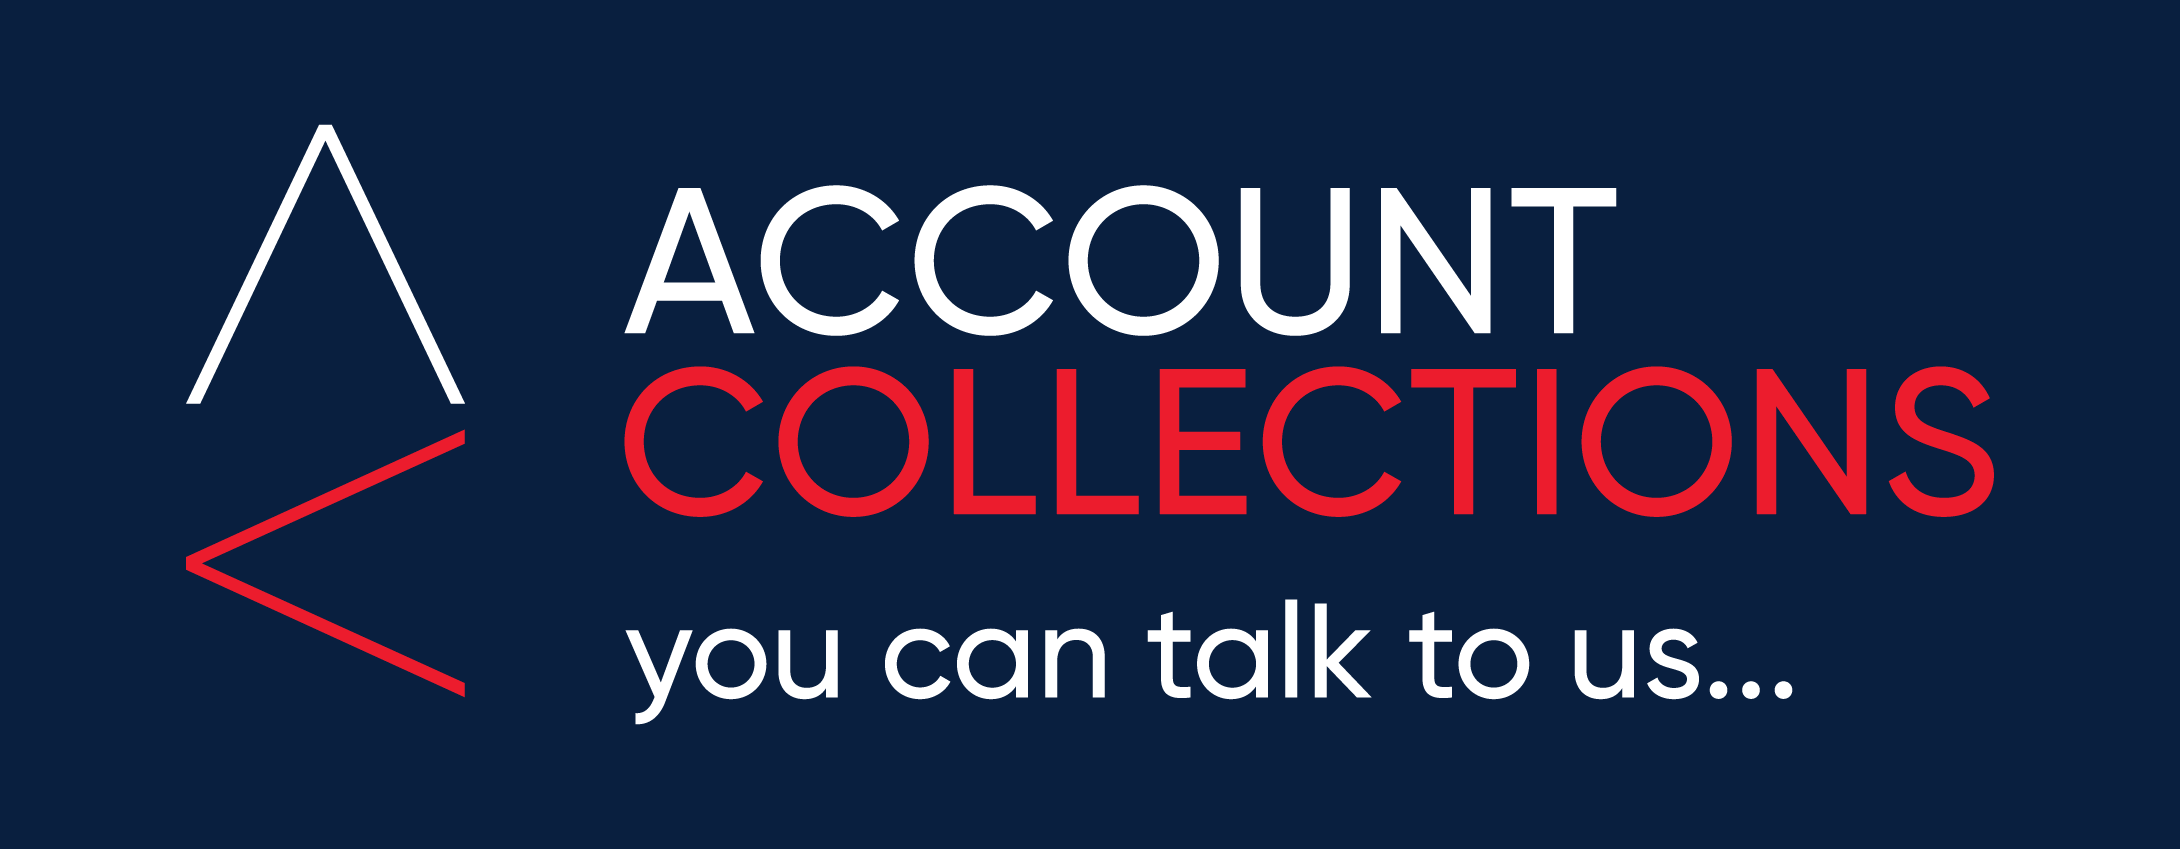 Account Collections